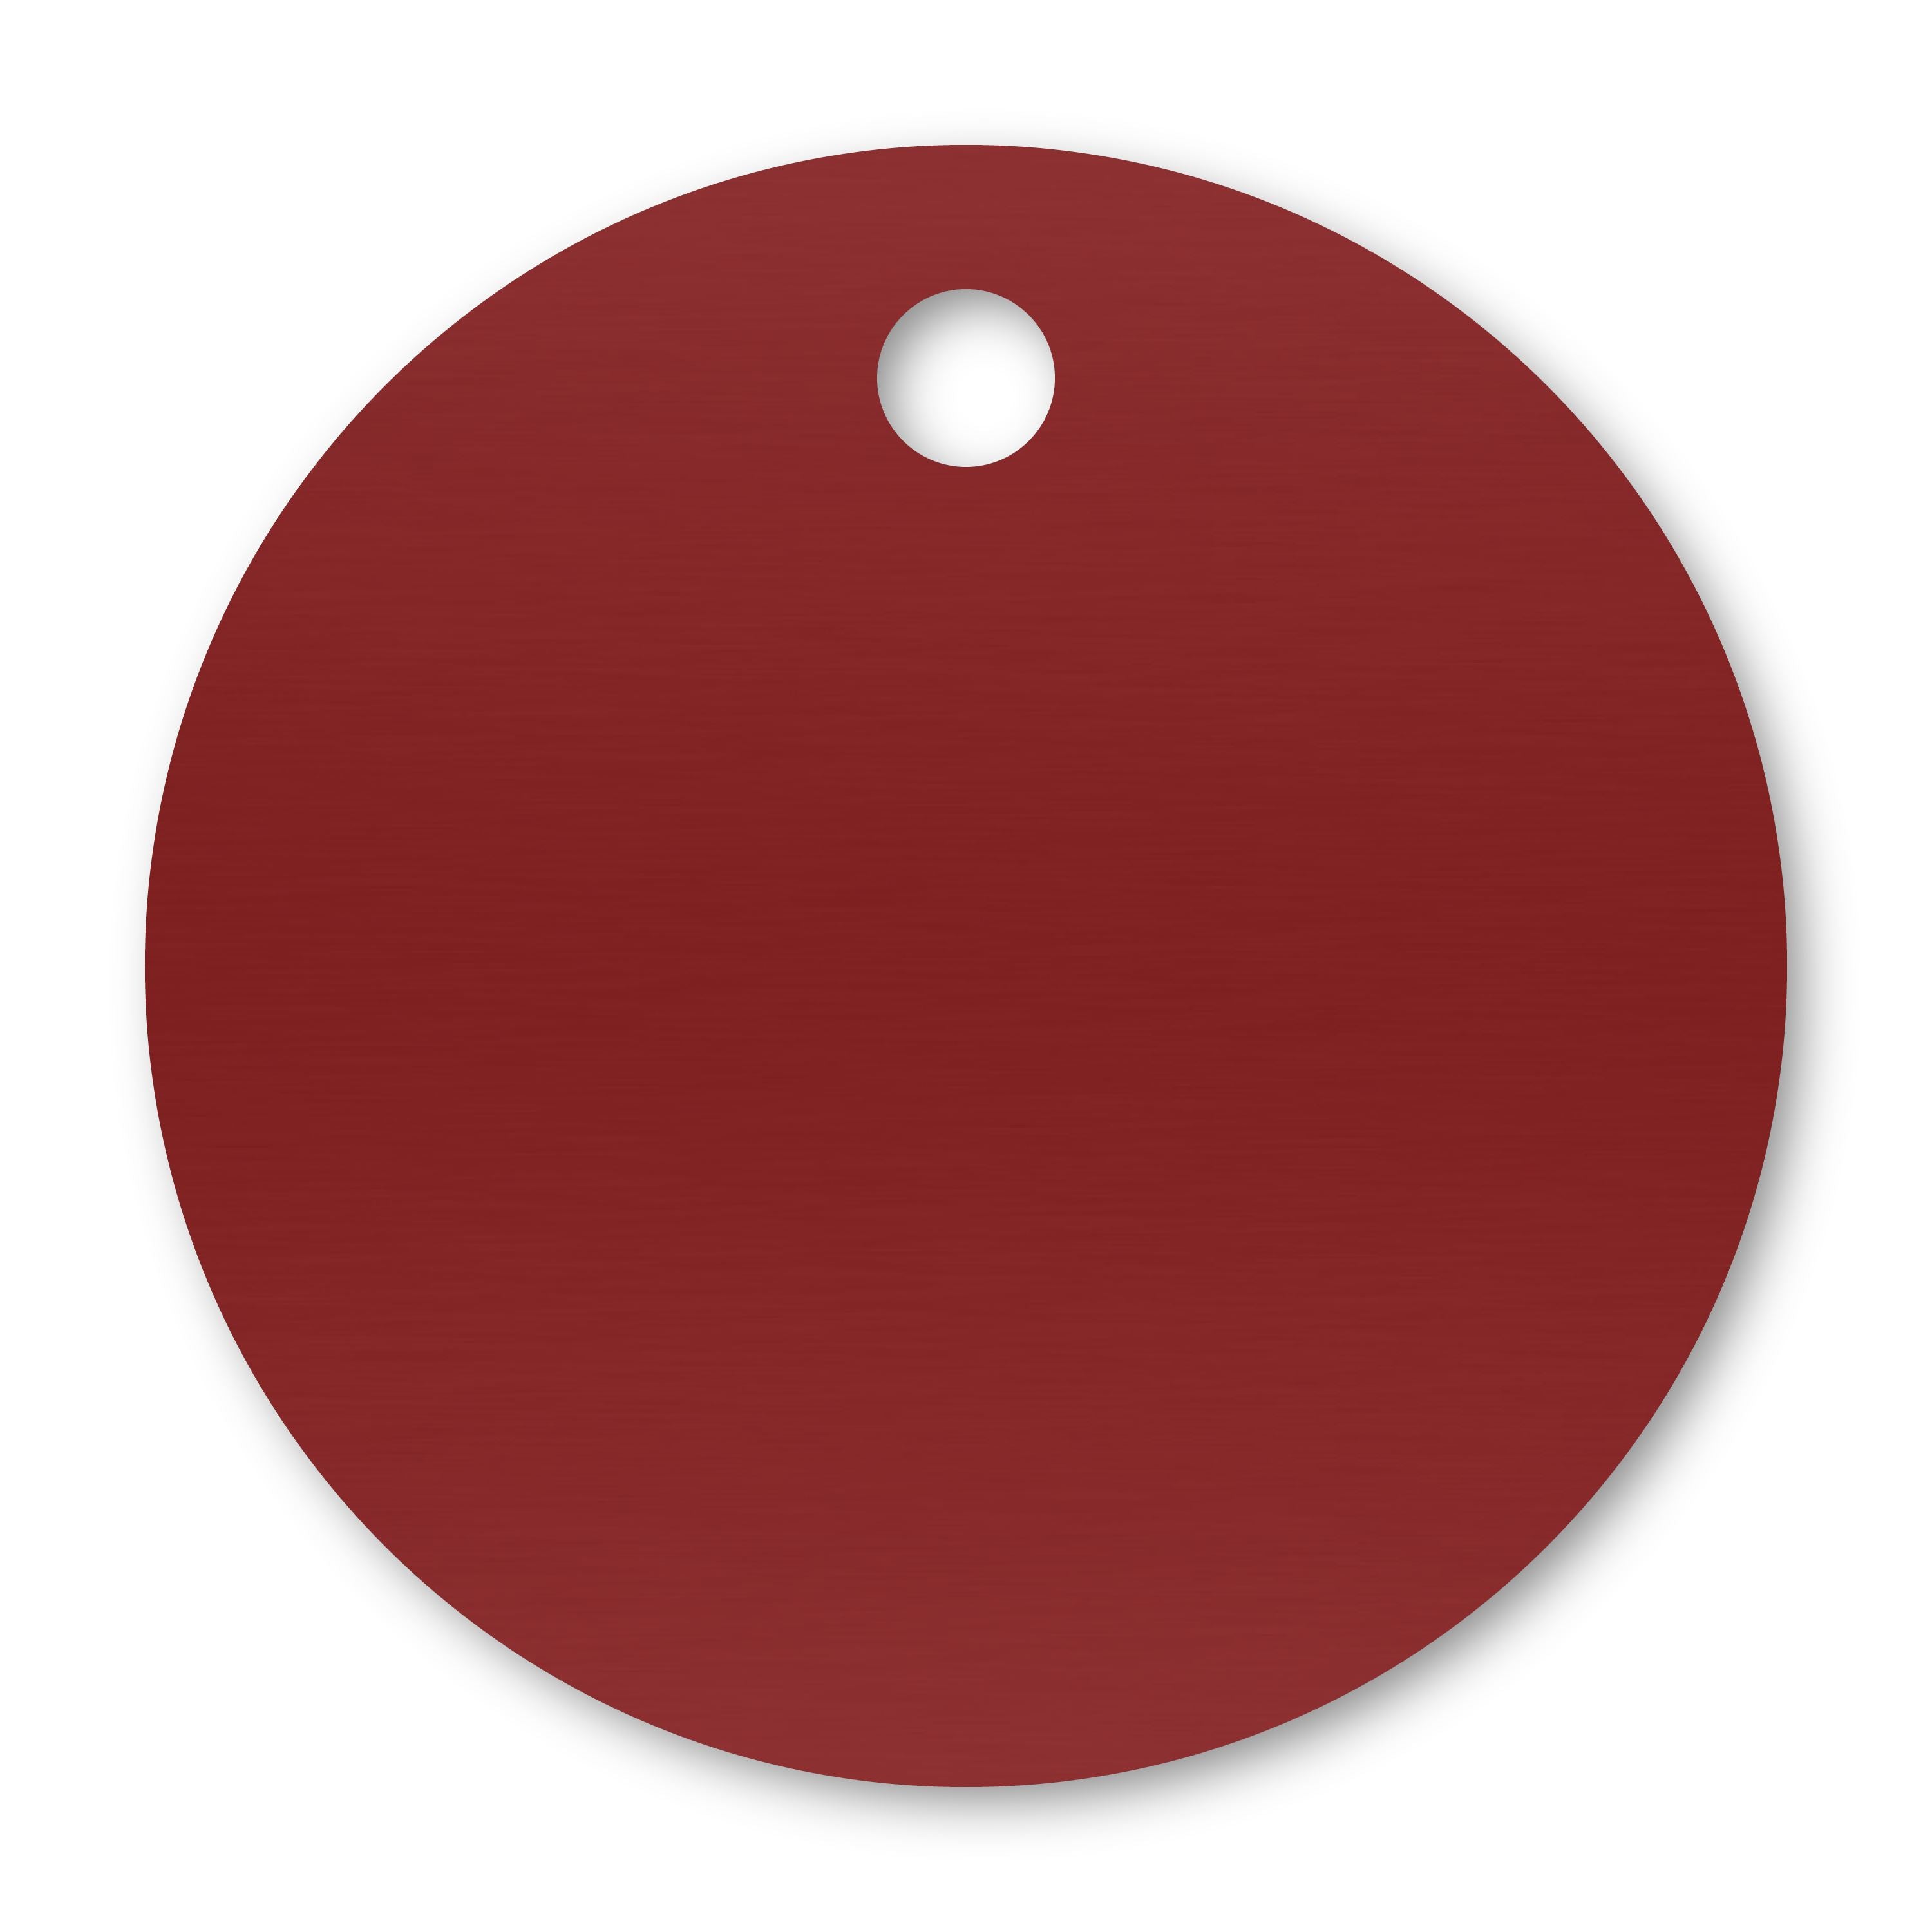 Anodized Aluminum Round Tags, 1" with 1/8" Hole, Laser Engraved Metal Tags Craftworks NW Red 